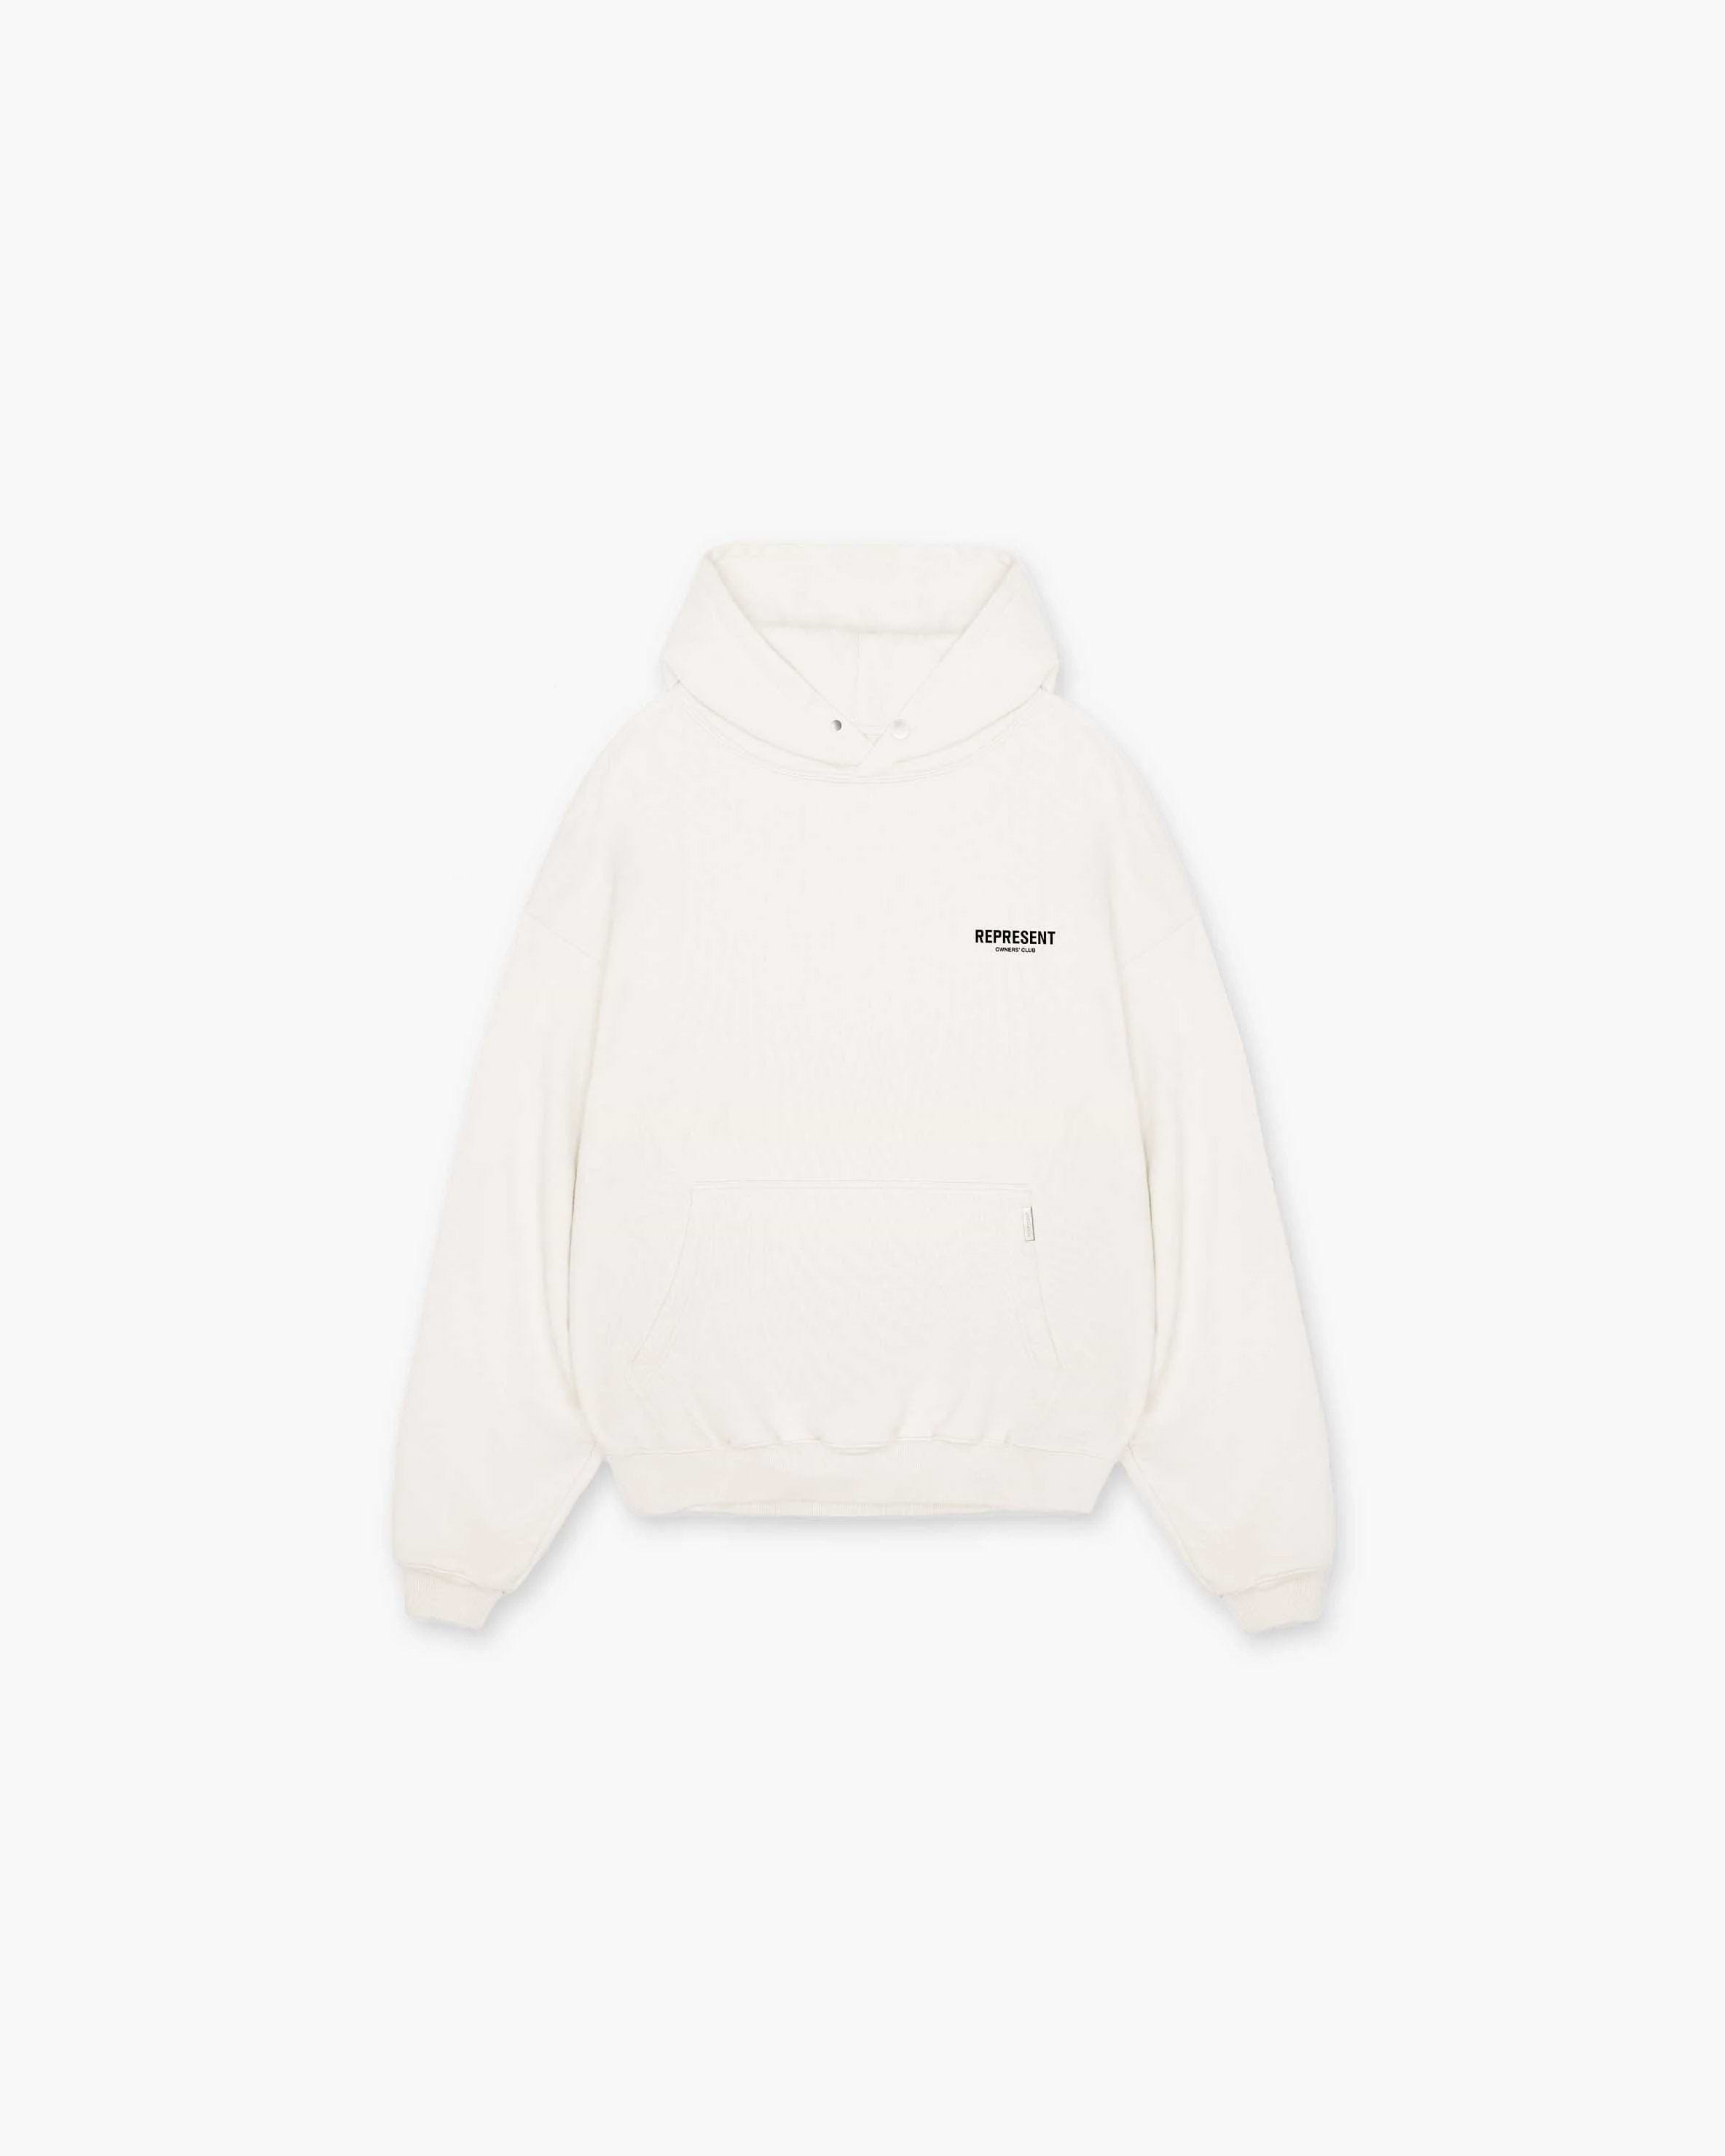 Flat White Hoodie | Owners Club | REPRESENT CLO